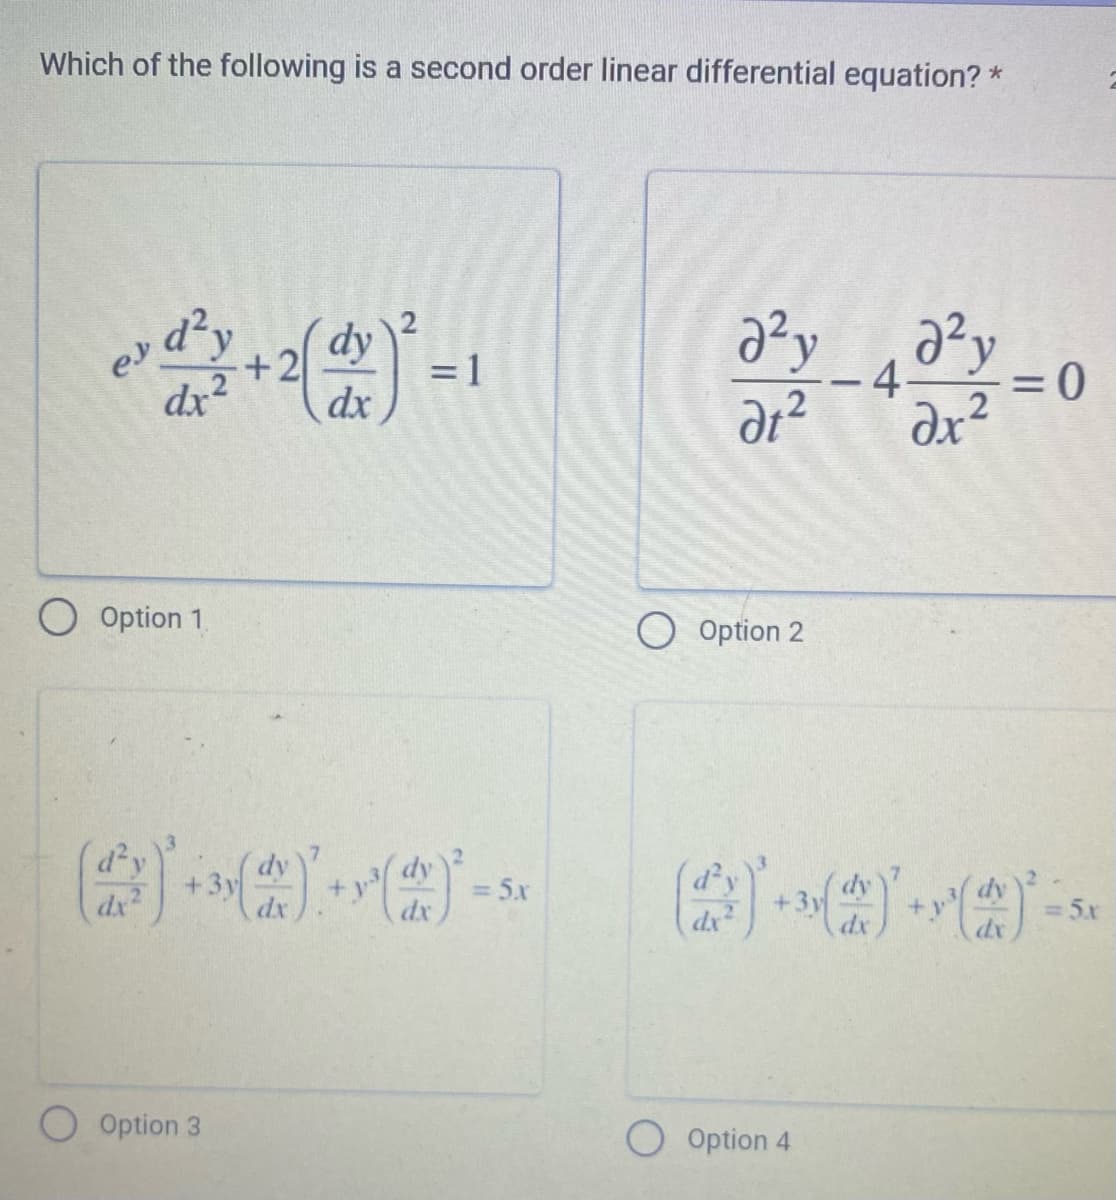 Which of the following is a second order linear differential equation? *
d²y
dx²
O Option 1
O Option 3
+ 2(dx ) ²
dy
=1
dx
= 5x
ду ду
at²
O Option 2
O Option 4
-403
əx²
2
=0
= 5x